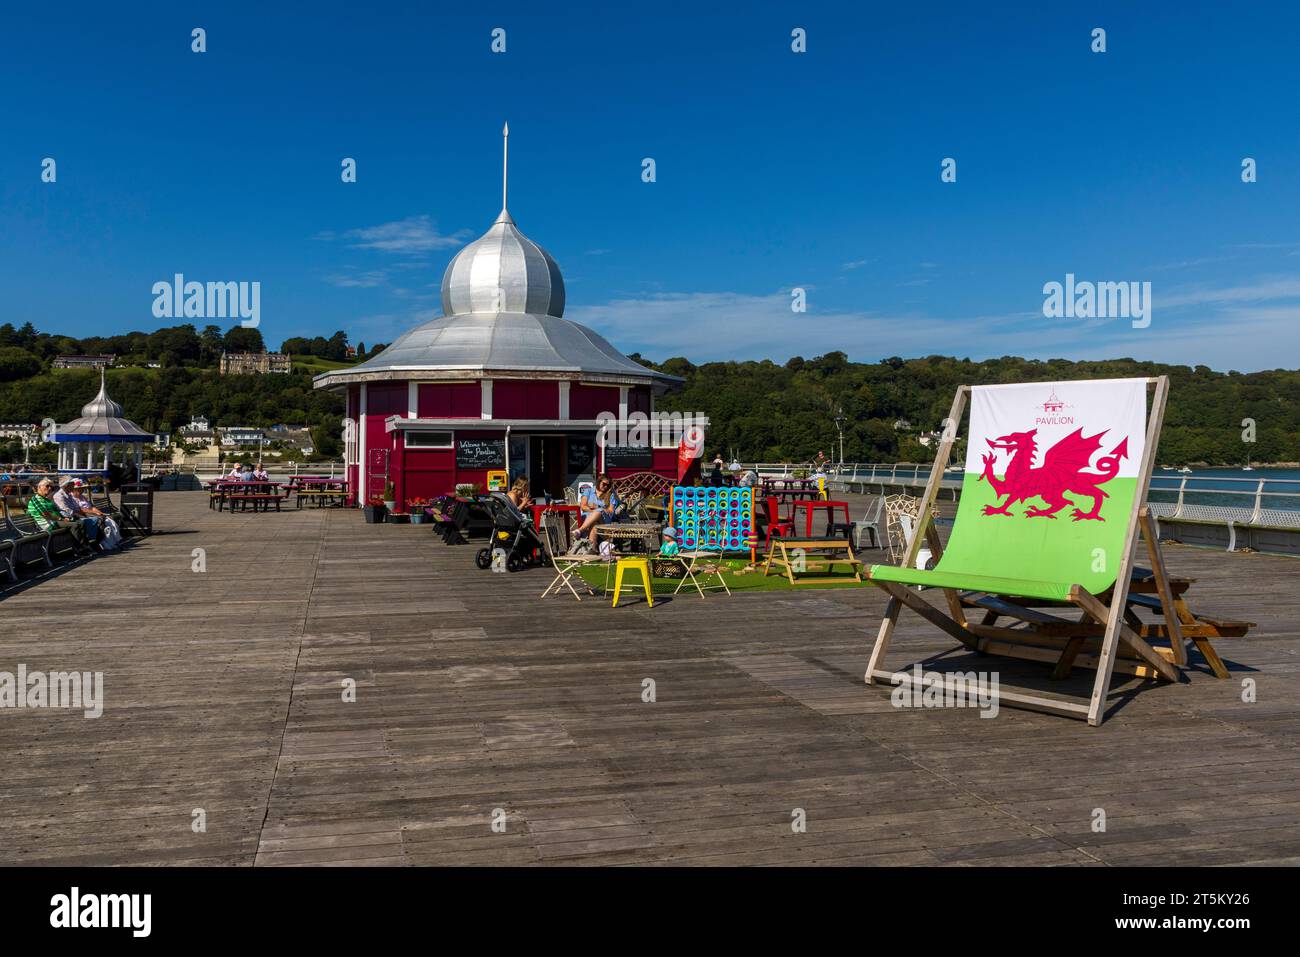 Bangor Pier, a Victorian pier located in the town of Bangor in North Wales. Stock Photo